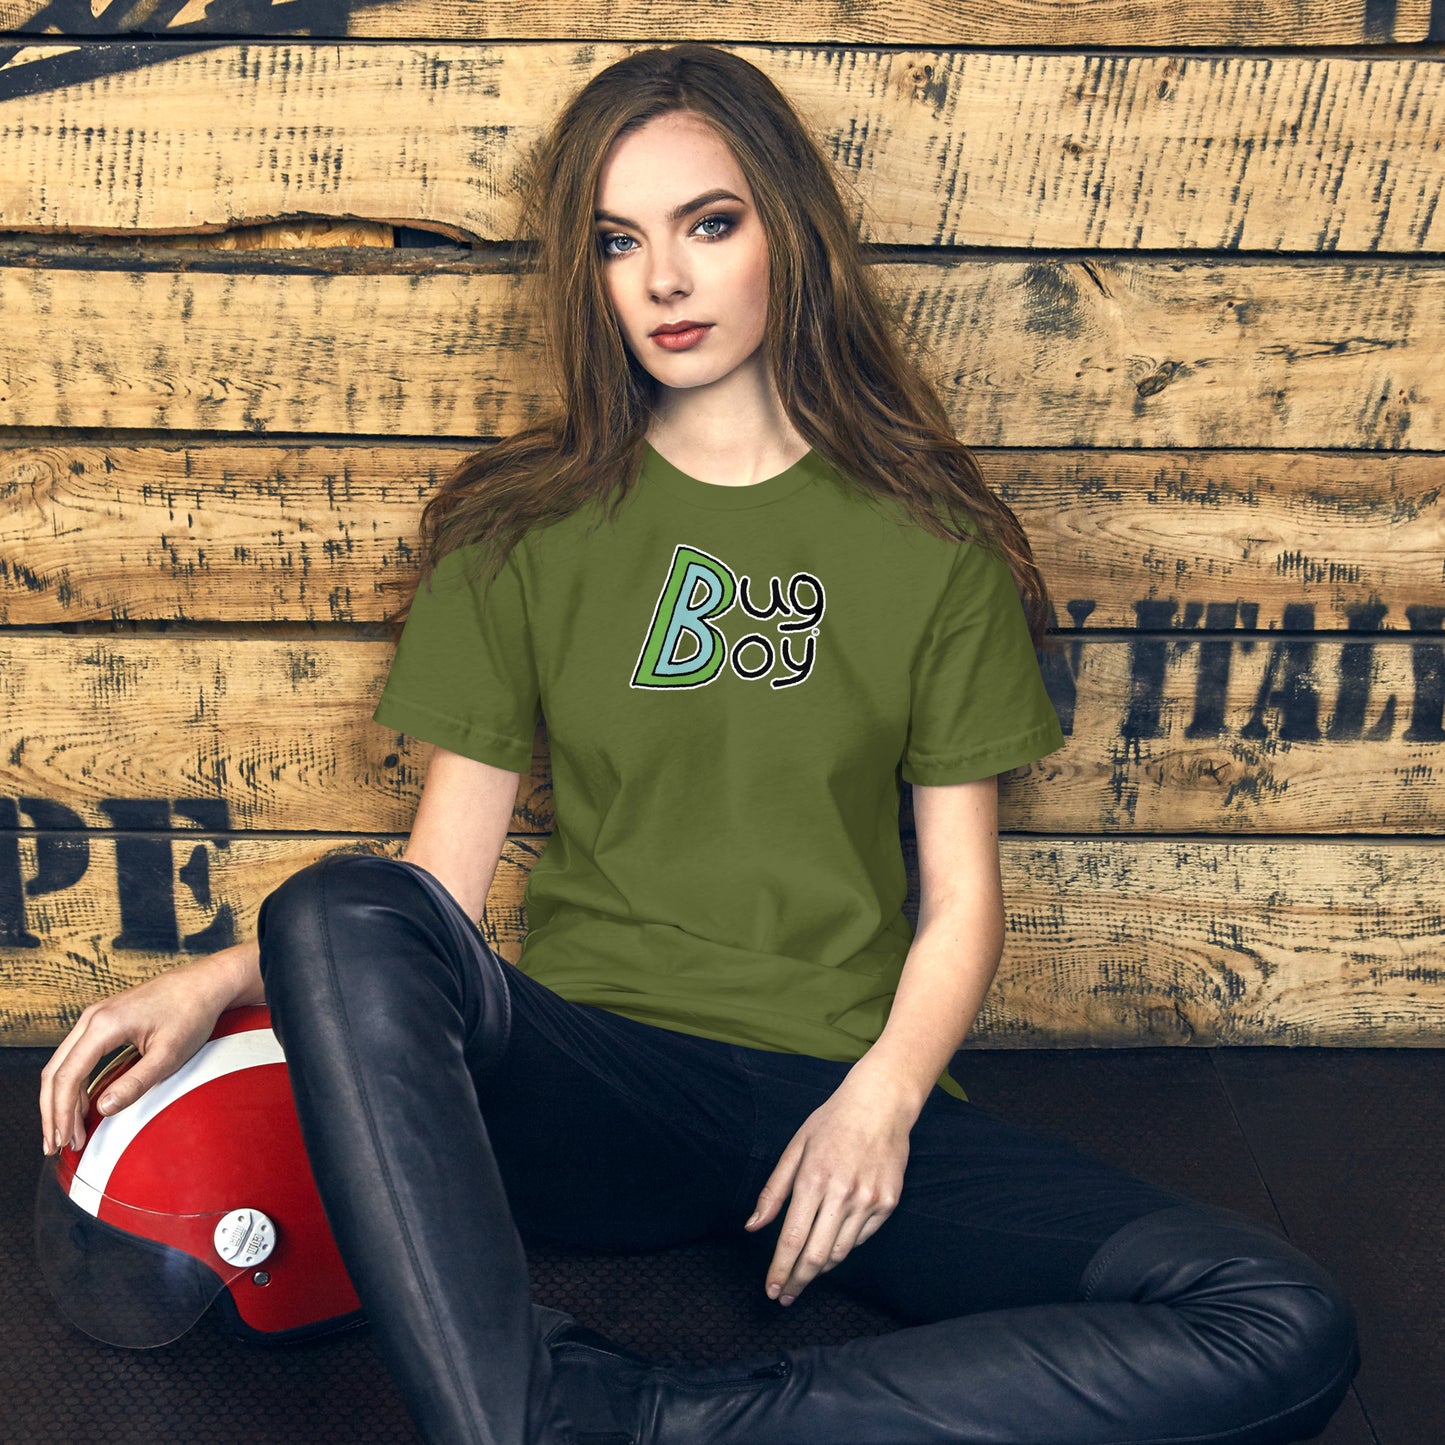 Bug Boy Logo T-Shirt in olive on female model - from The Bug Bungalow